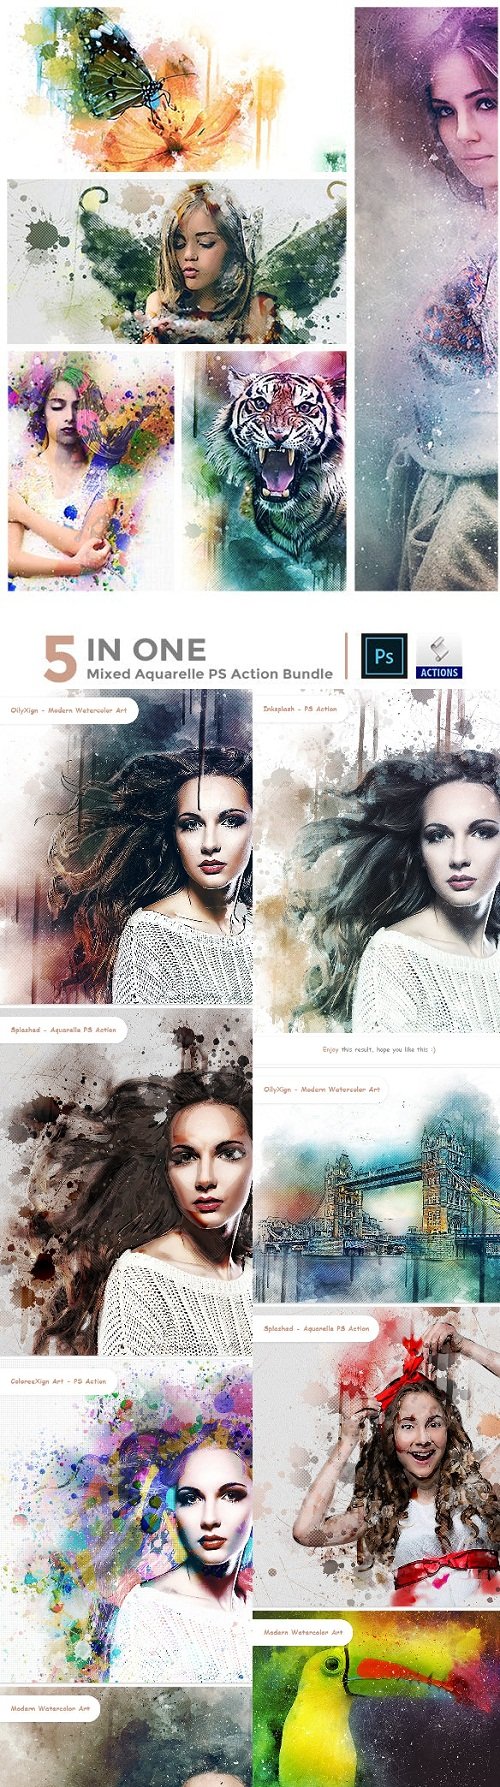 5 in One Mixed Aquarelle PS Action Bundle - 23066719